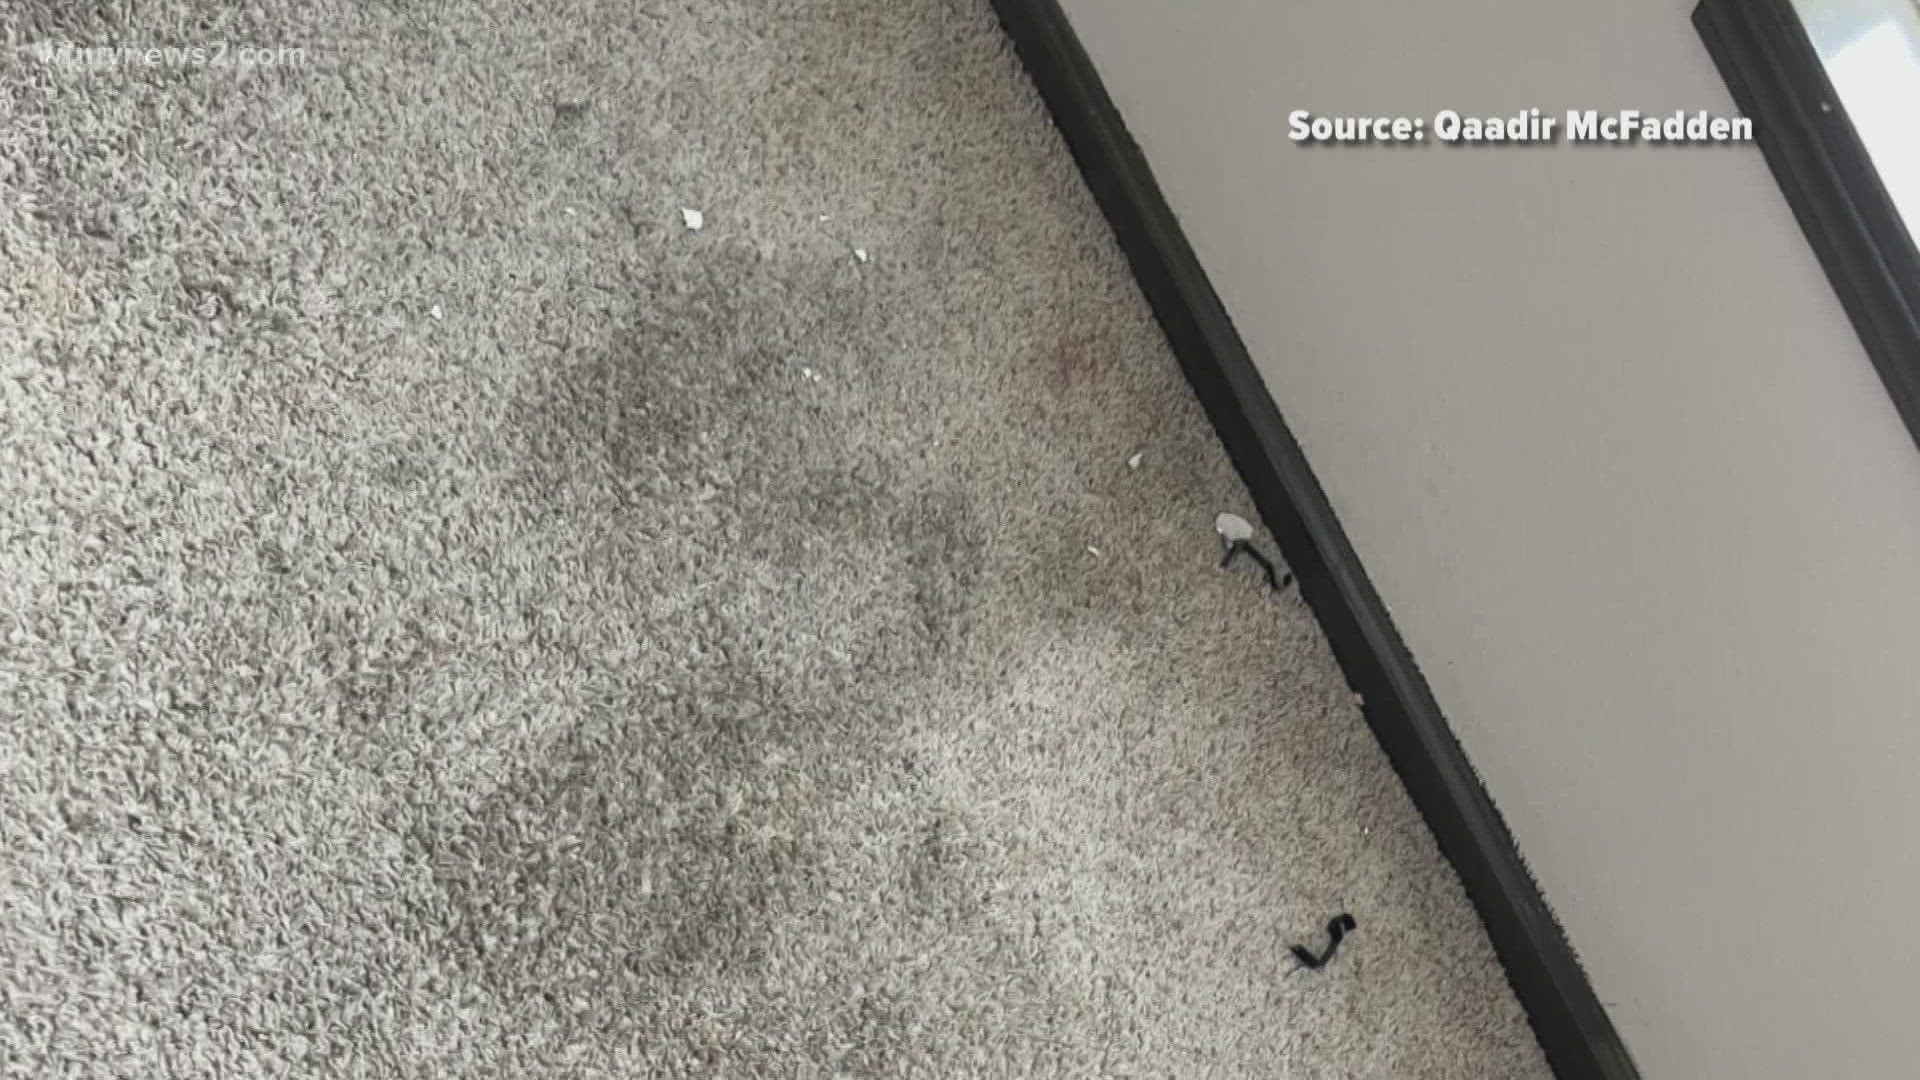 One parent said she and her student found trash, dirt, hair, mold, and dust when they walked into the unit for the first time, and shared photos of the mess.